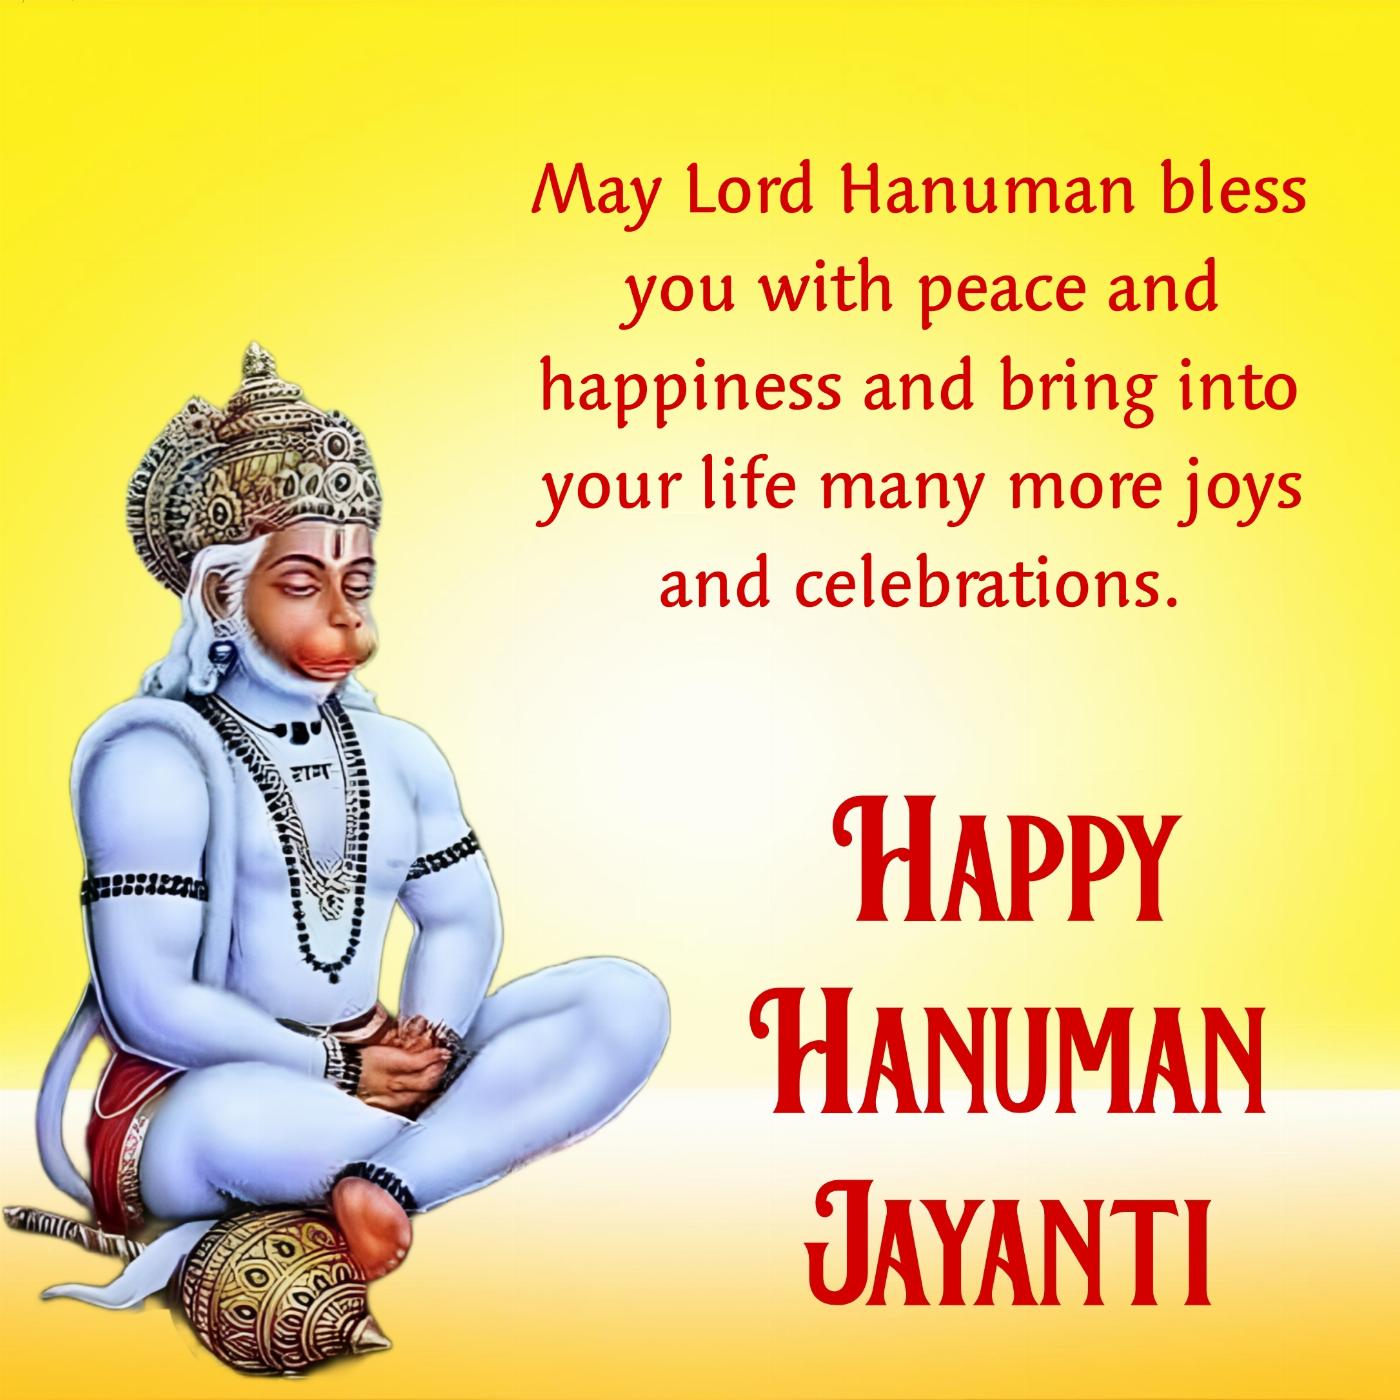 May Lord Hanuman bless you with peace and happiness